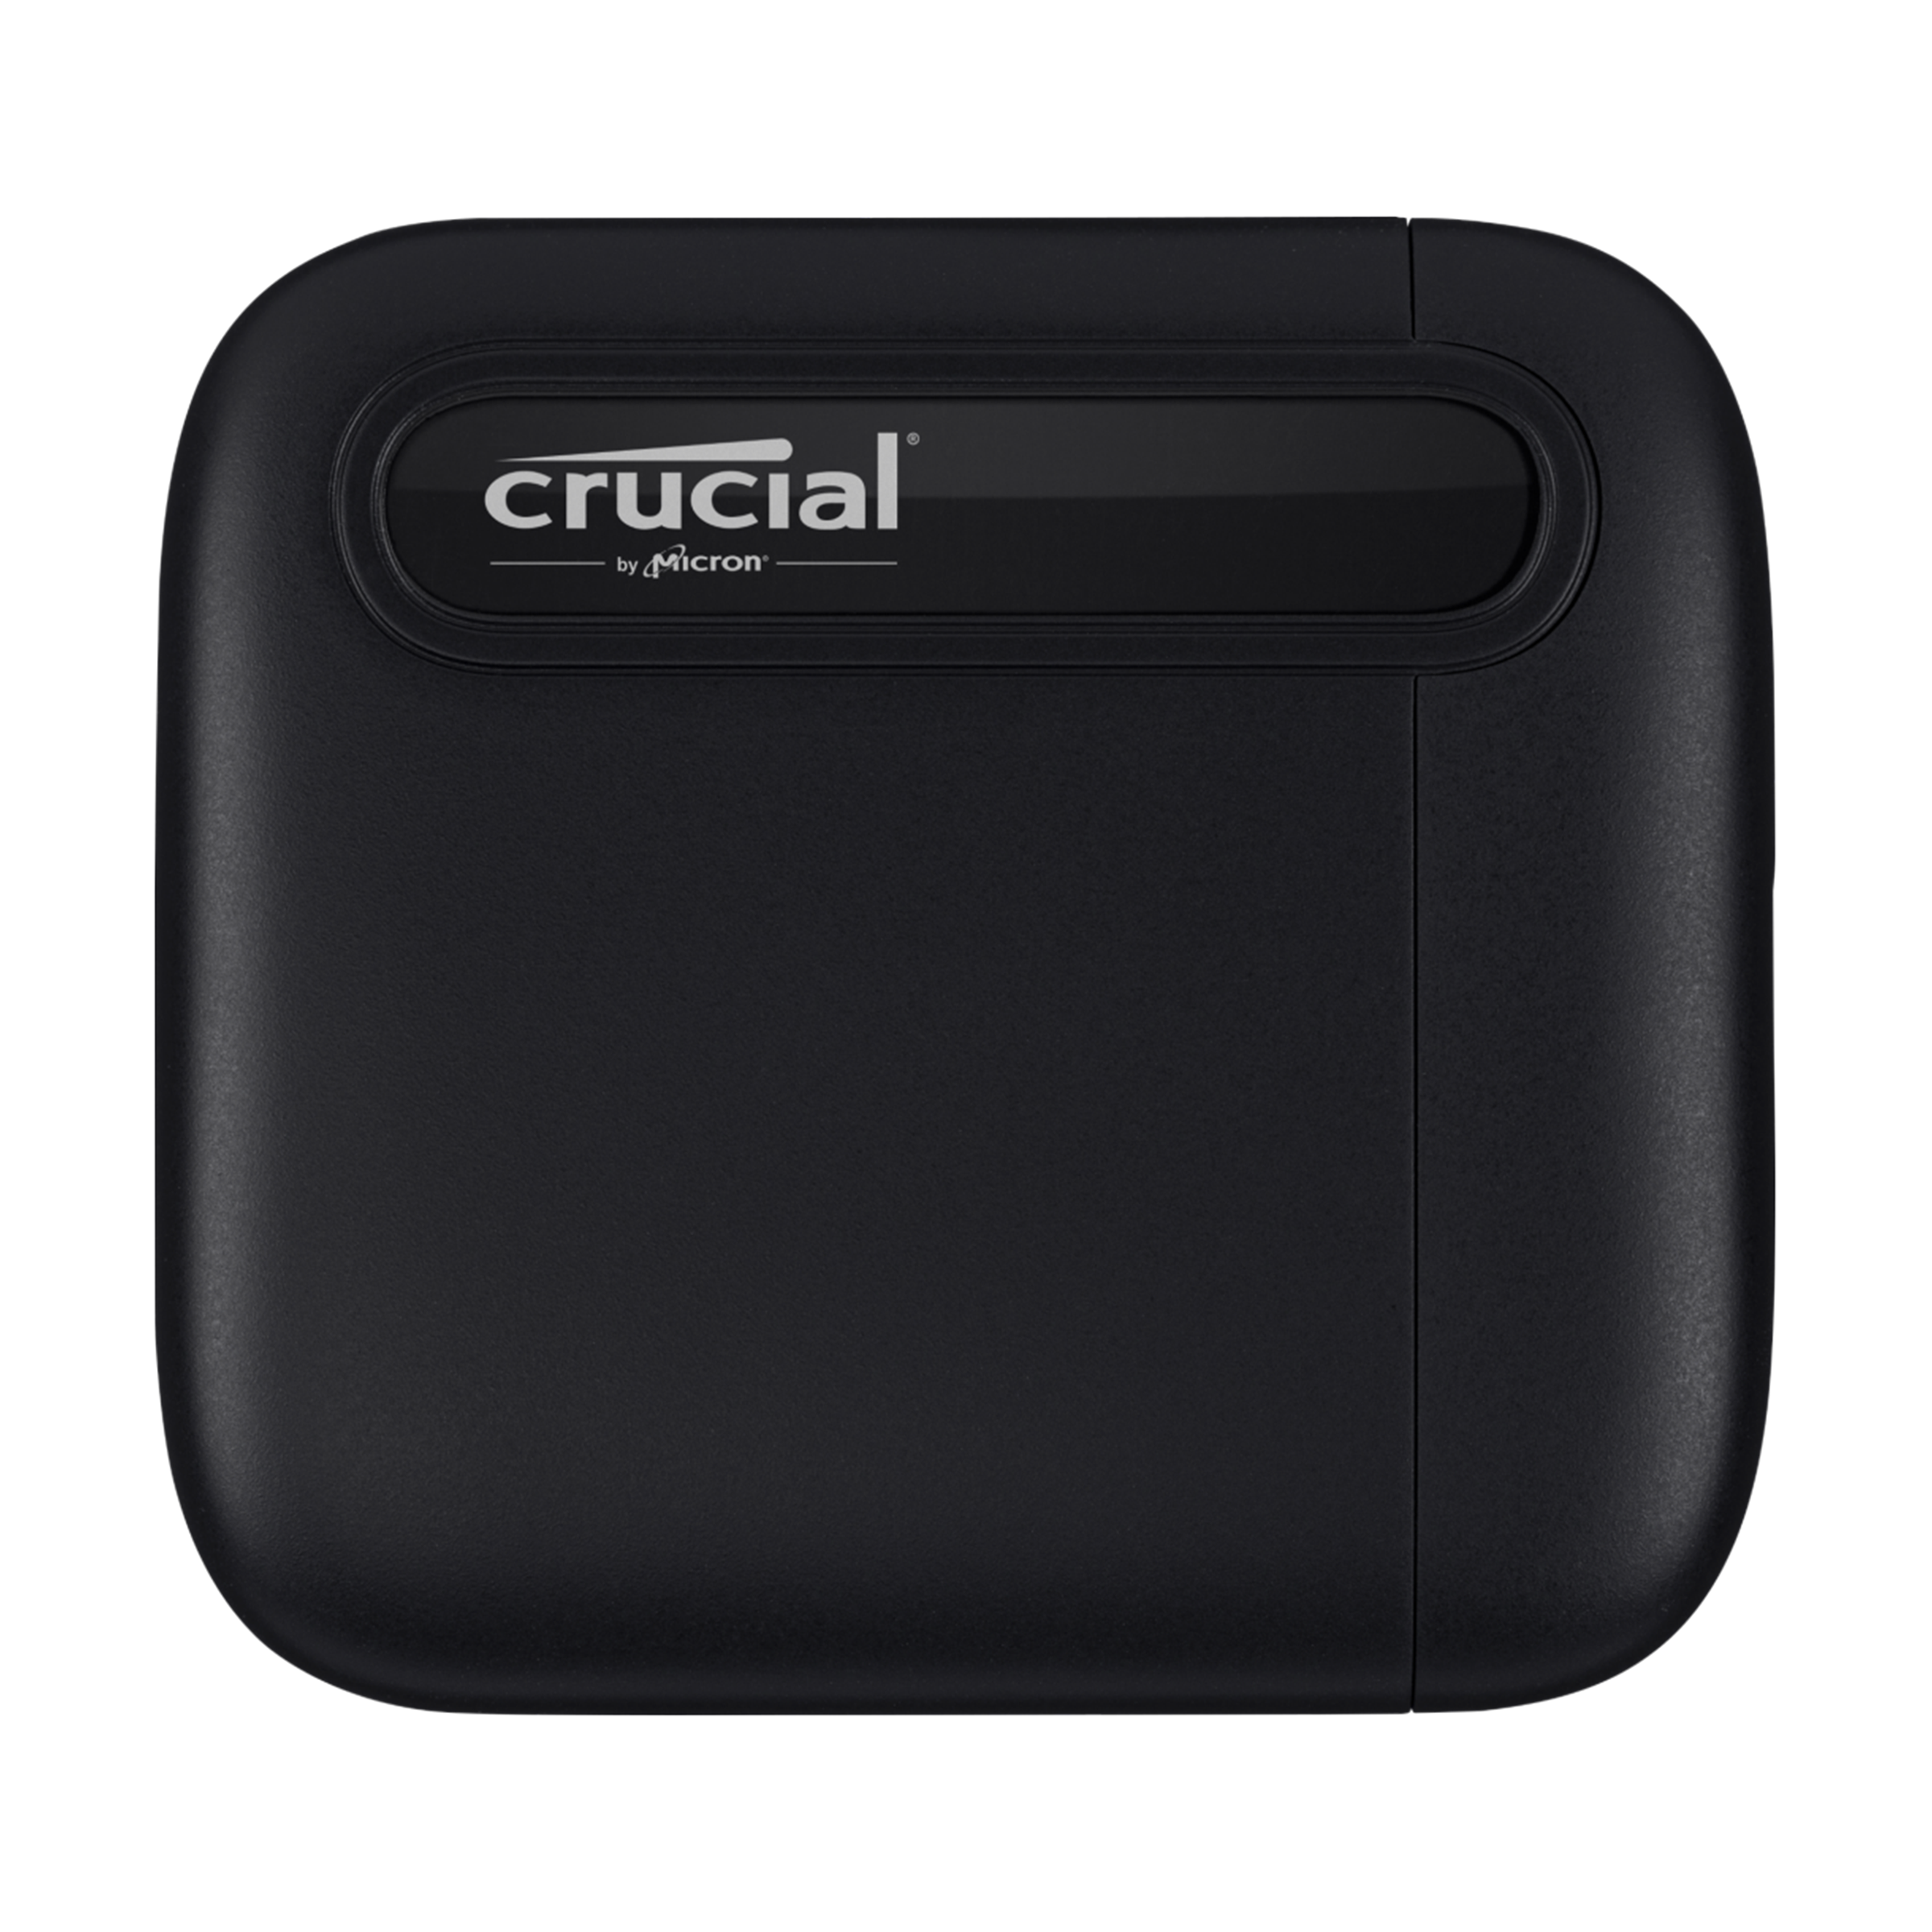 Crucial X6 2TB USB 3.2 (Type-C) Solid State Drive (Shock & Vibration Proof, CT2000X6SSD9, Black)